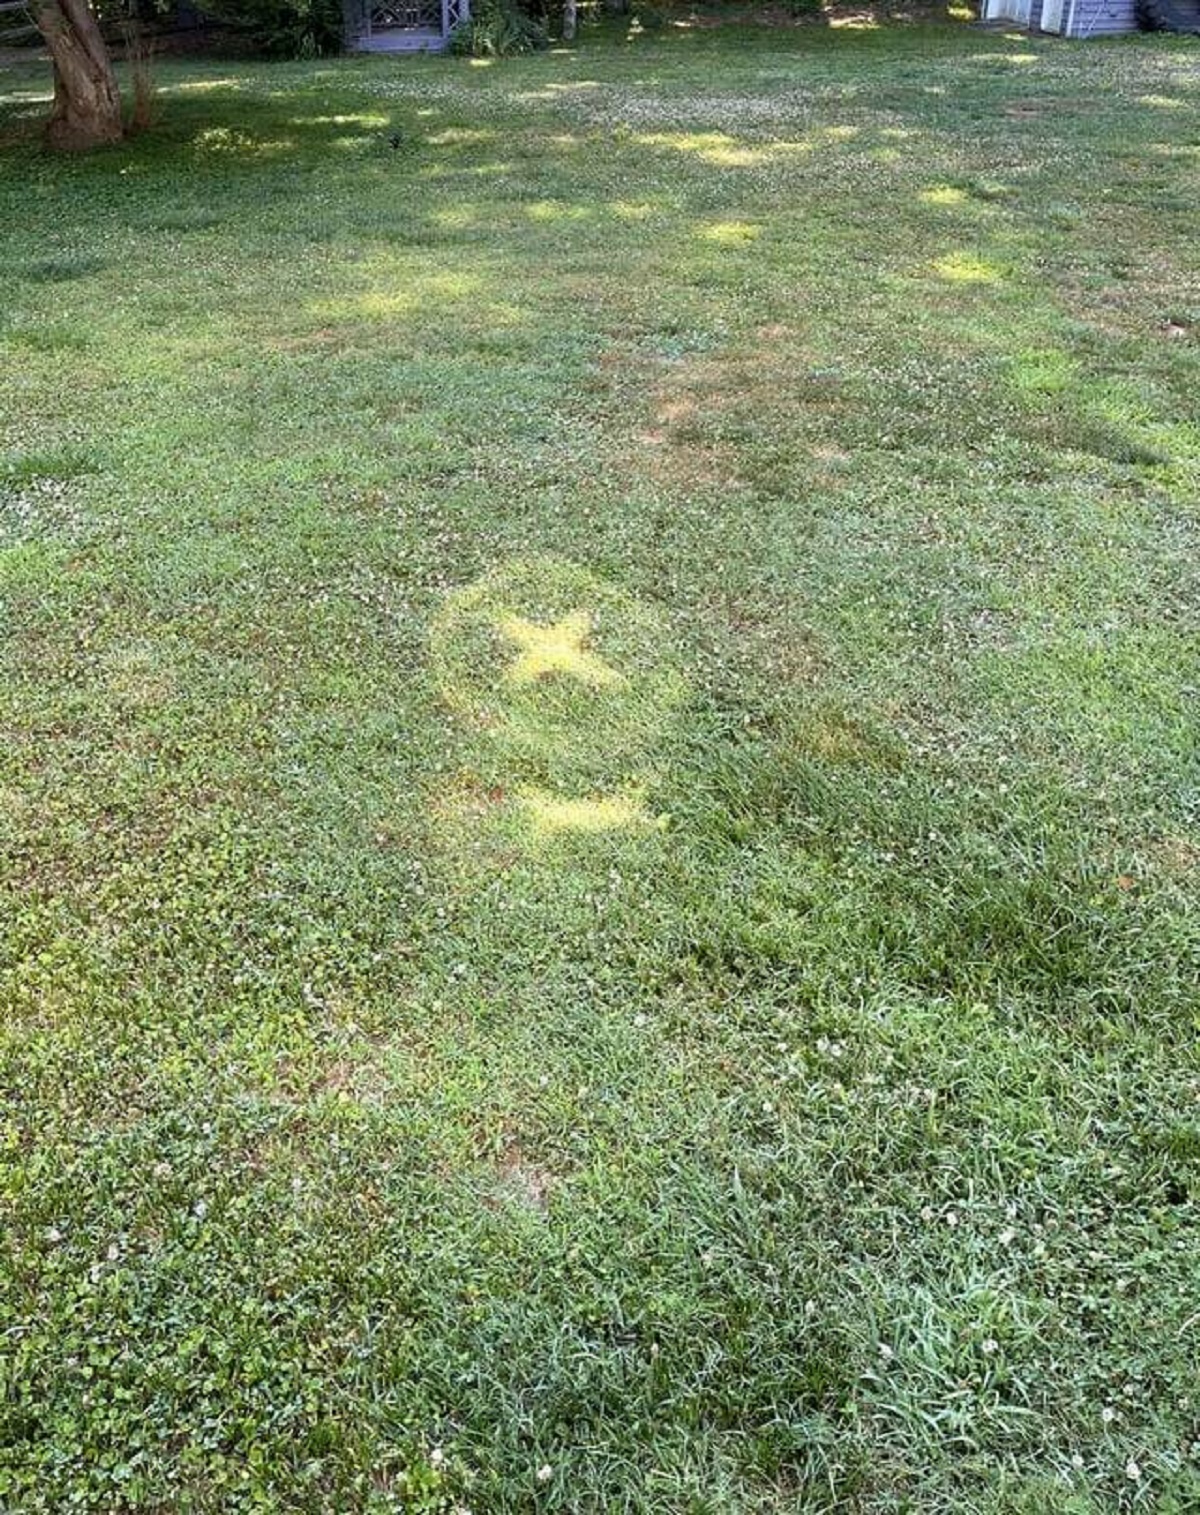 "This light spot reflecting an X with a circle around it that we've never seen before in our yard."